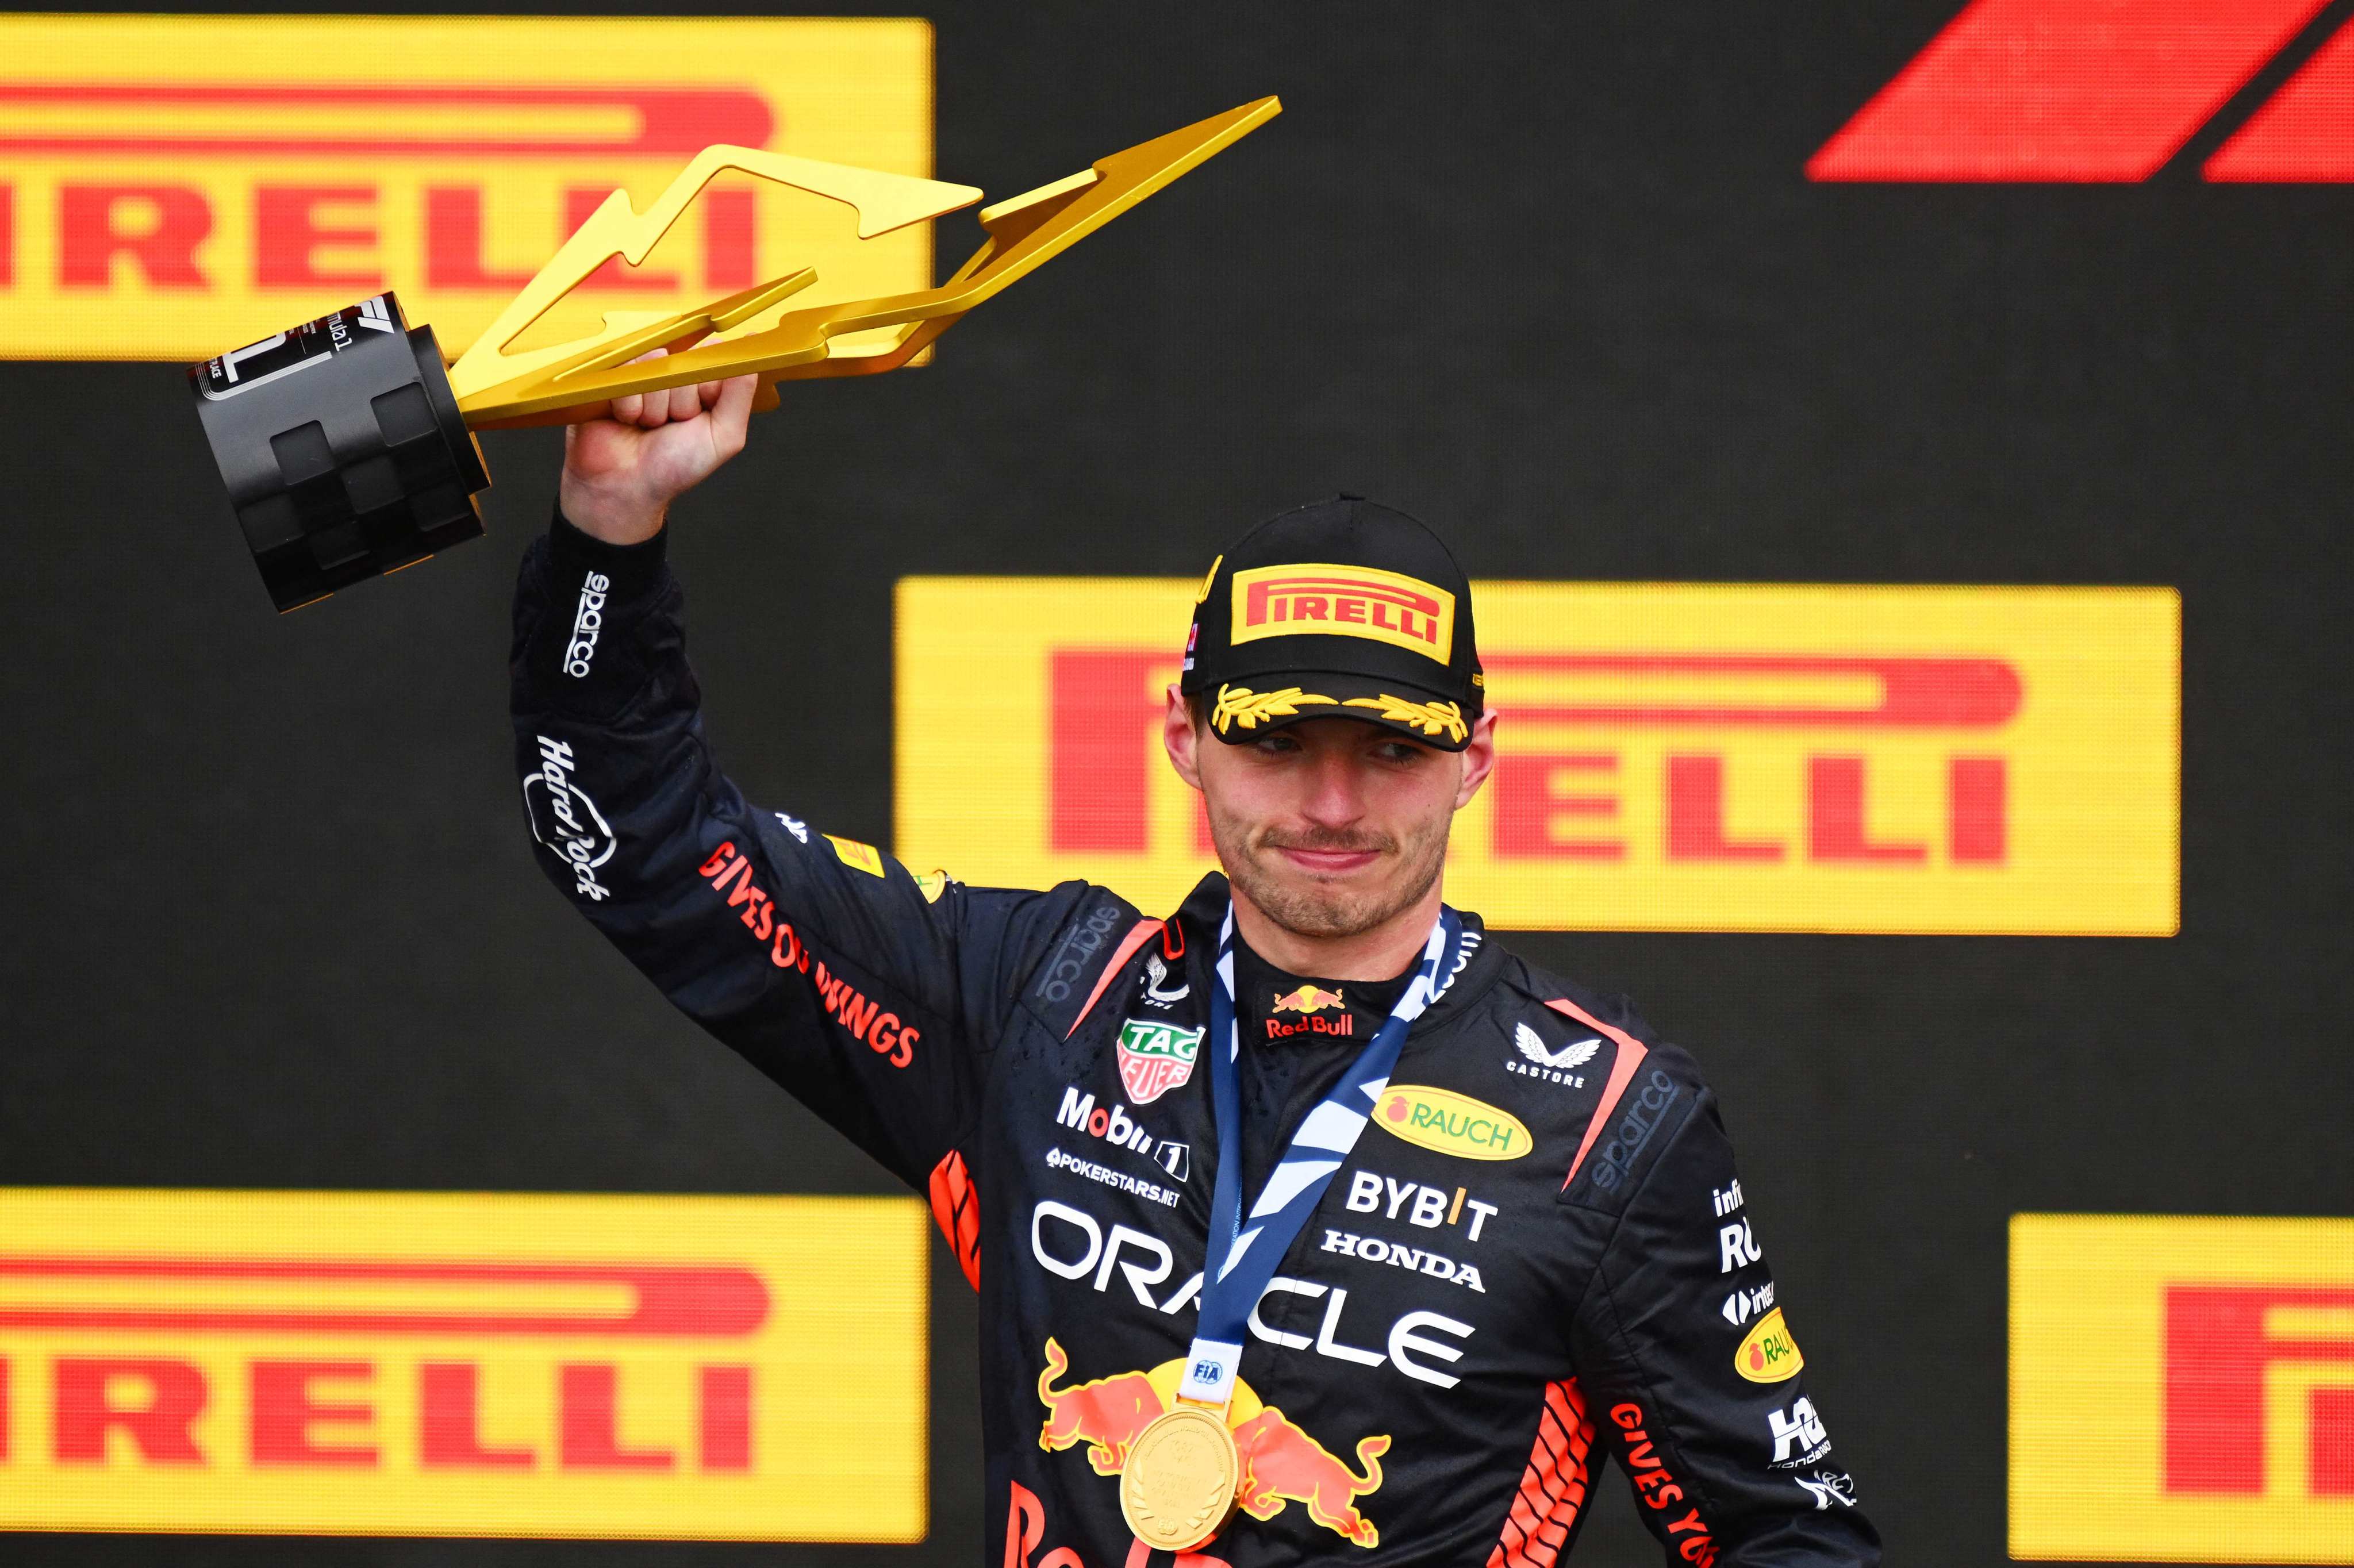 The Netherlands’ Max Verstappen celebrates on the podium at the Canadian Grand Prix in Montreal, Quebec on Sunday. Photo: Getty Images via AFP 